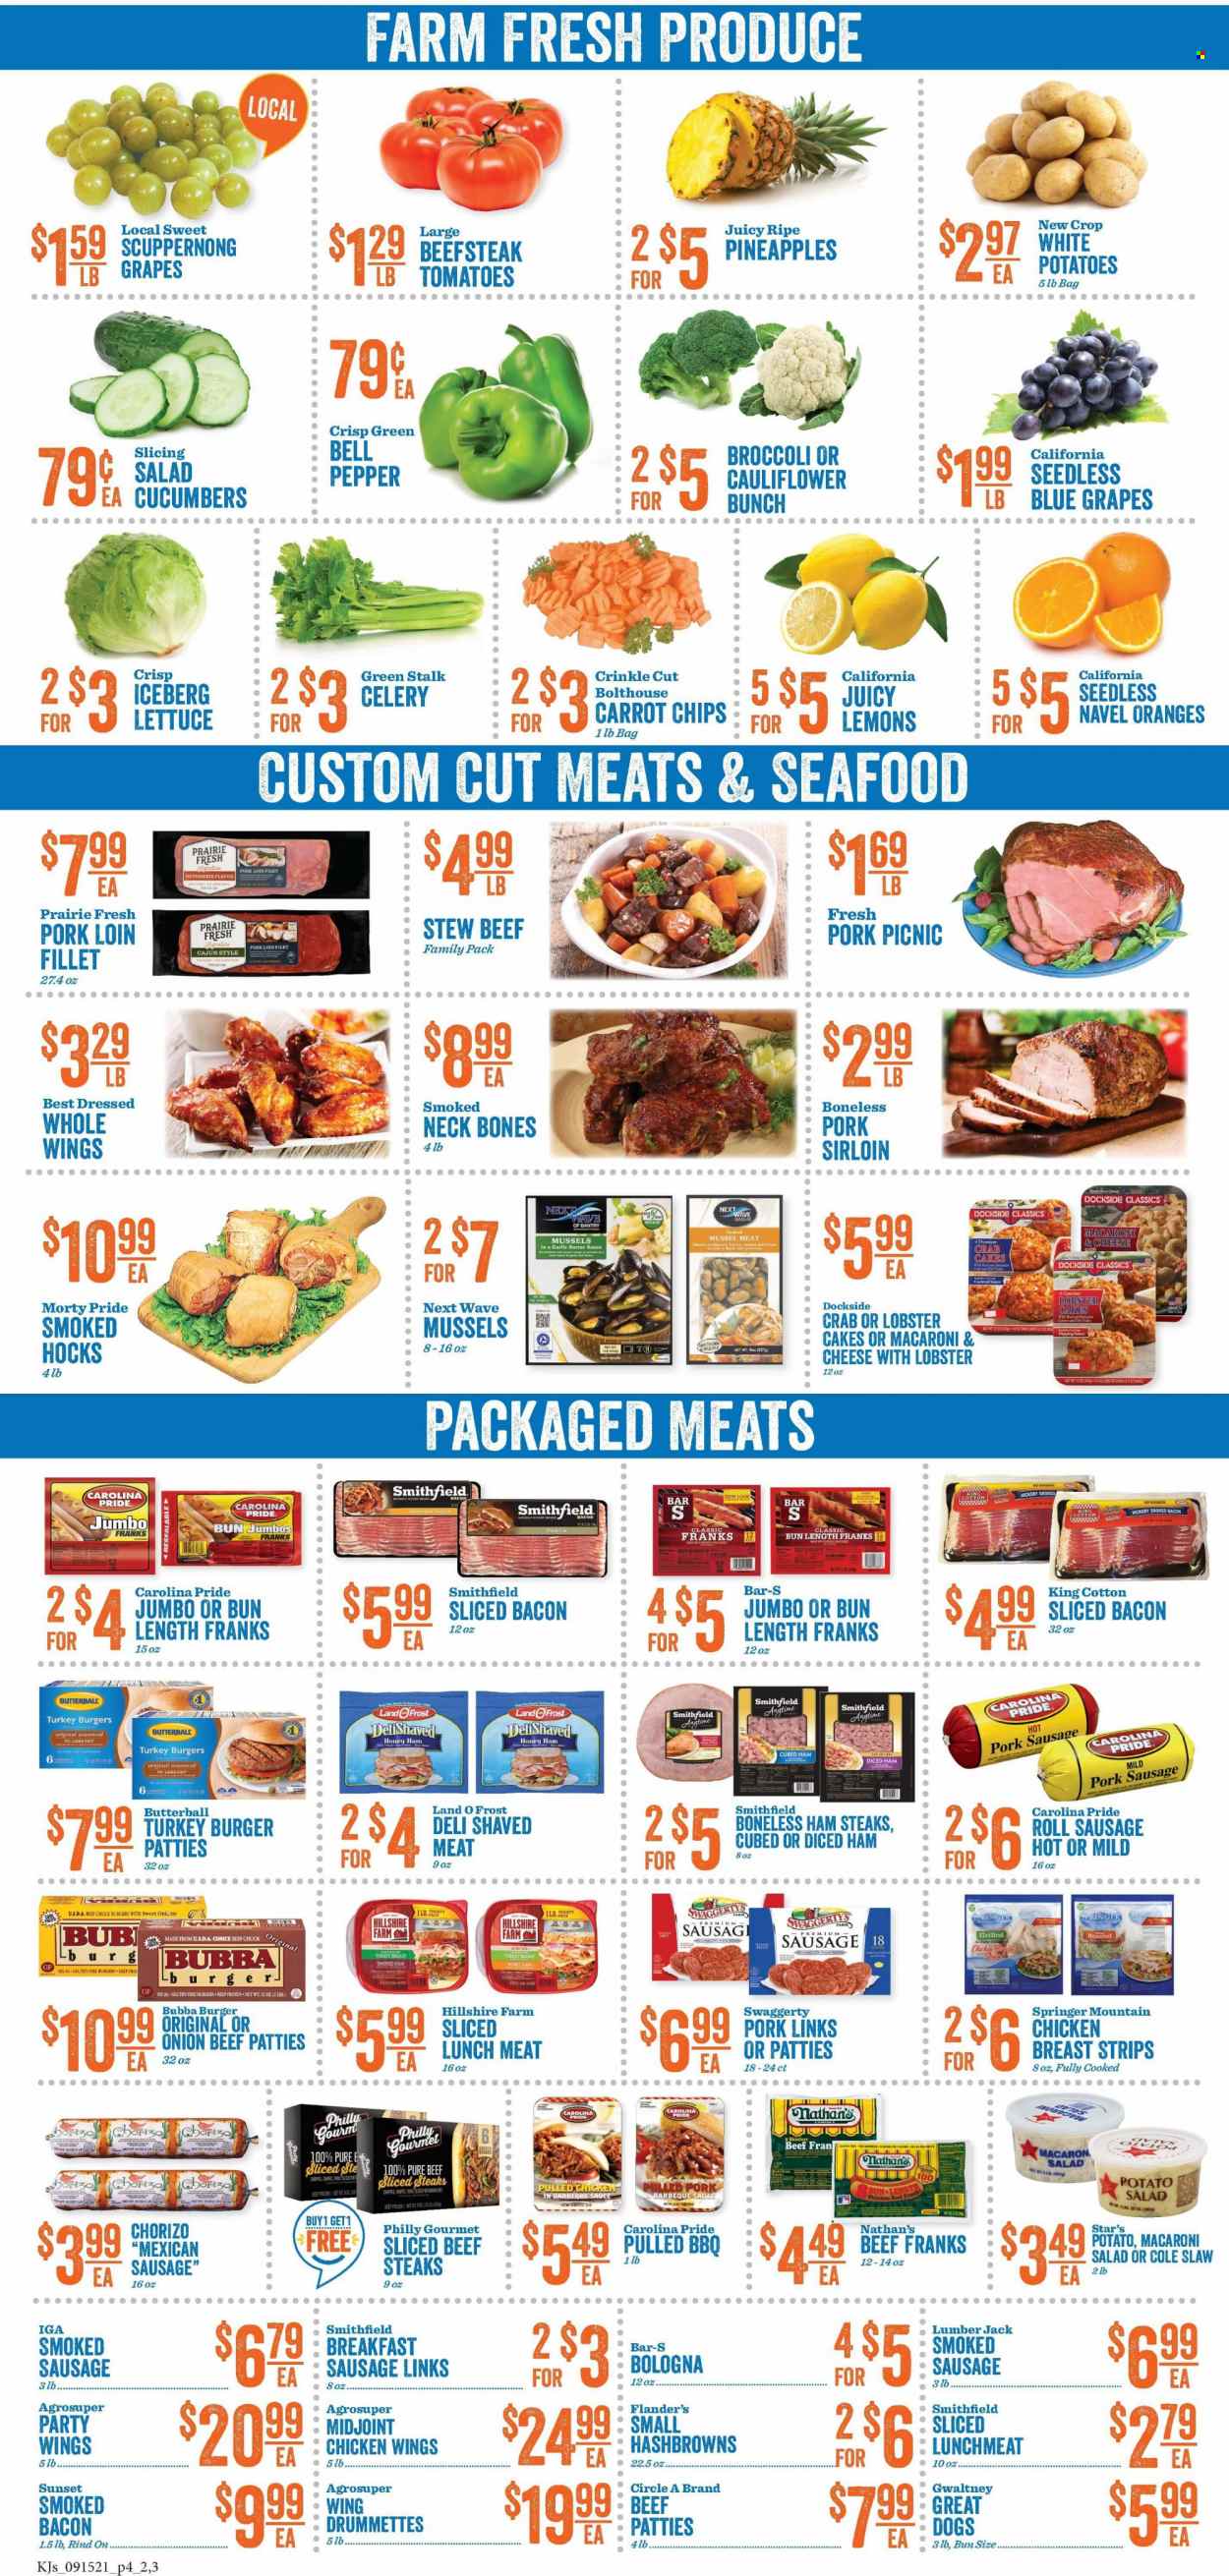 thumbnail - KJ´s Market Flyer - 09/15/2021 - 09/21/2021 - Sales products - cake, bell peppers, broccoli, celery, cucumber, tomatoes, potatoes, lettuce, grapes, pineapple, oranges, eel, lobster, mussels, seafood, crab, lobster cakes, macaroni & cheese, sauce, pulled chicken, bacon, Butterball, ham, Hillshire Farm, chorizo, smoked ham, sausage, smoked sausage, pork sausage, macaroni salad, lunch meat, ham steaks, chicken wings, strips, hash browns, BBQ sauce, beef meat, beef steak, steak, burger patties, turkey burger, pork loin, pork meat, WAVE, lemons, navel oranges. Page 4.